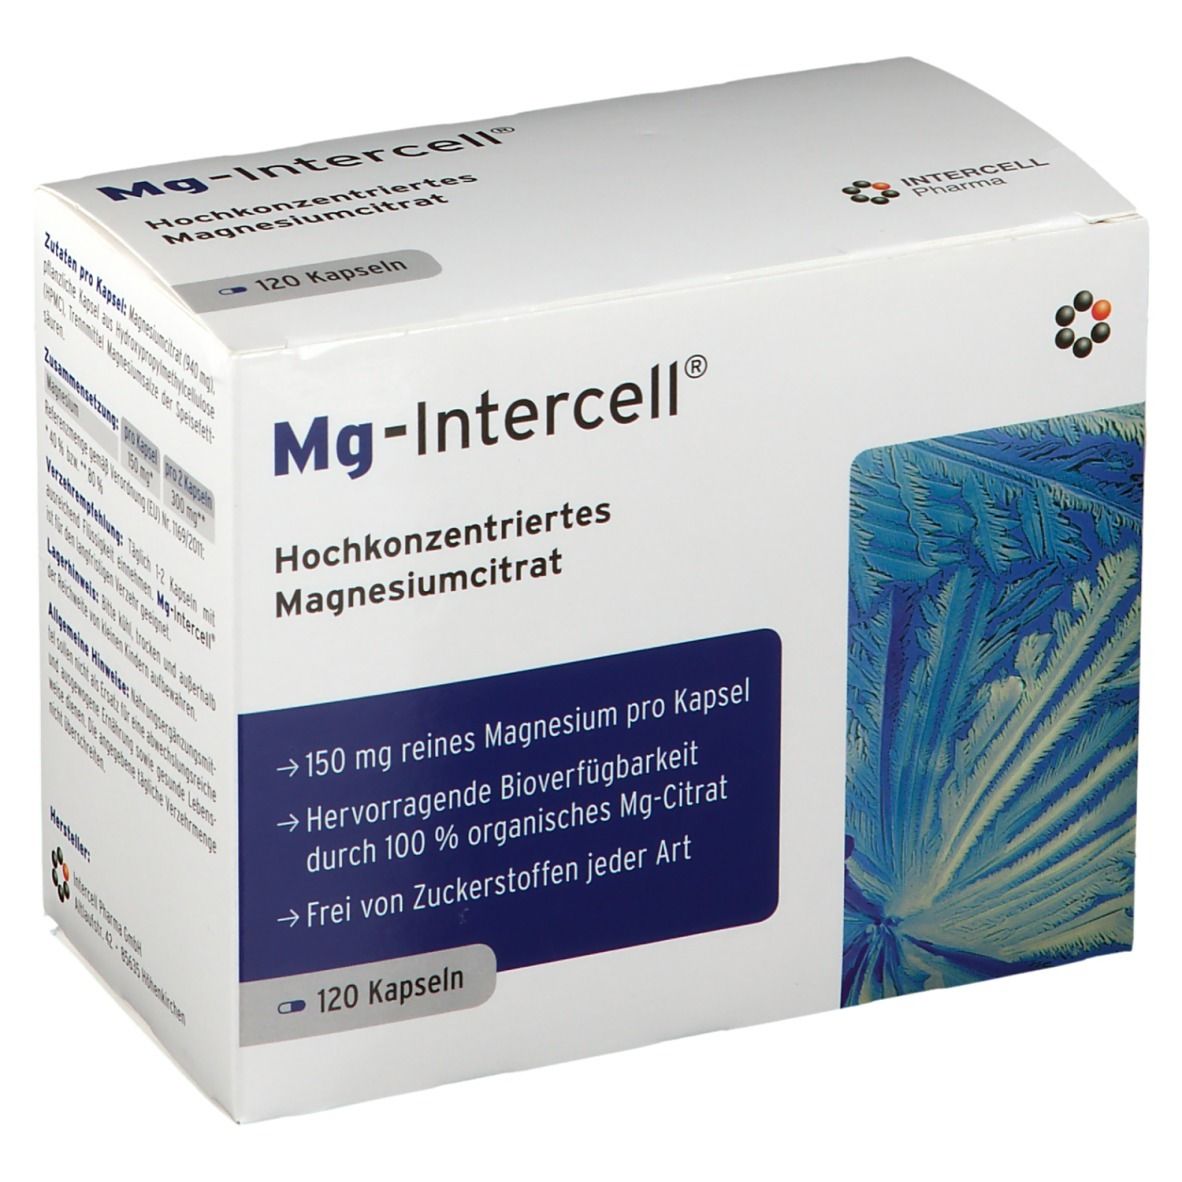 Mg-Intercell®